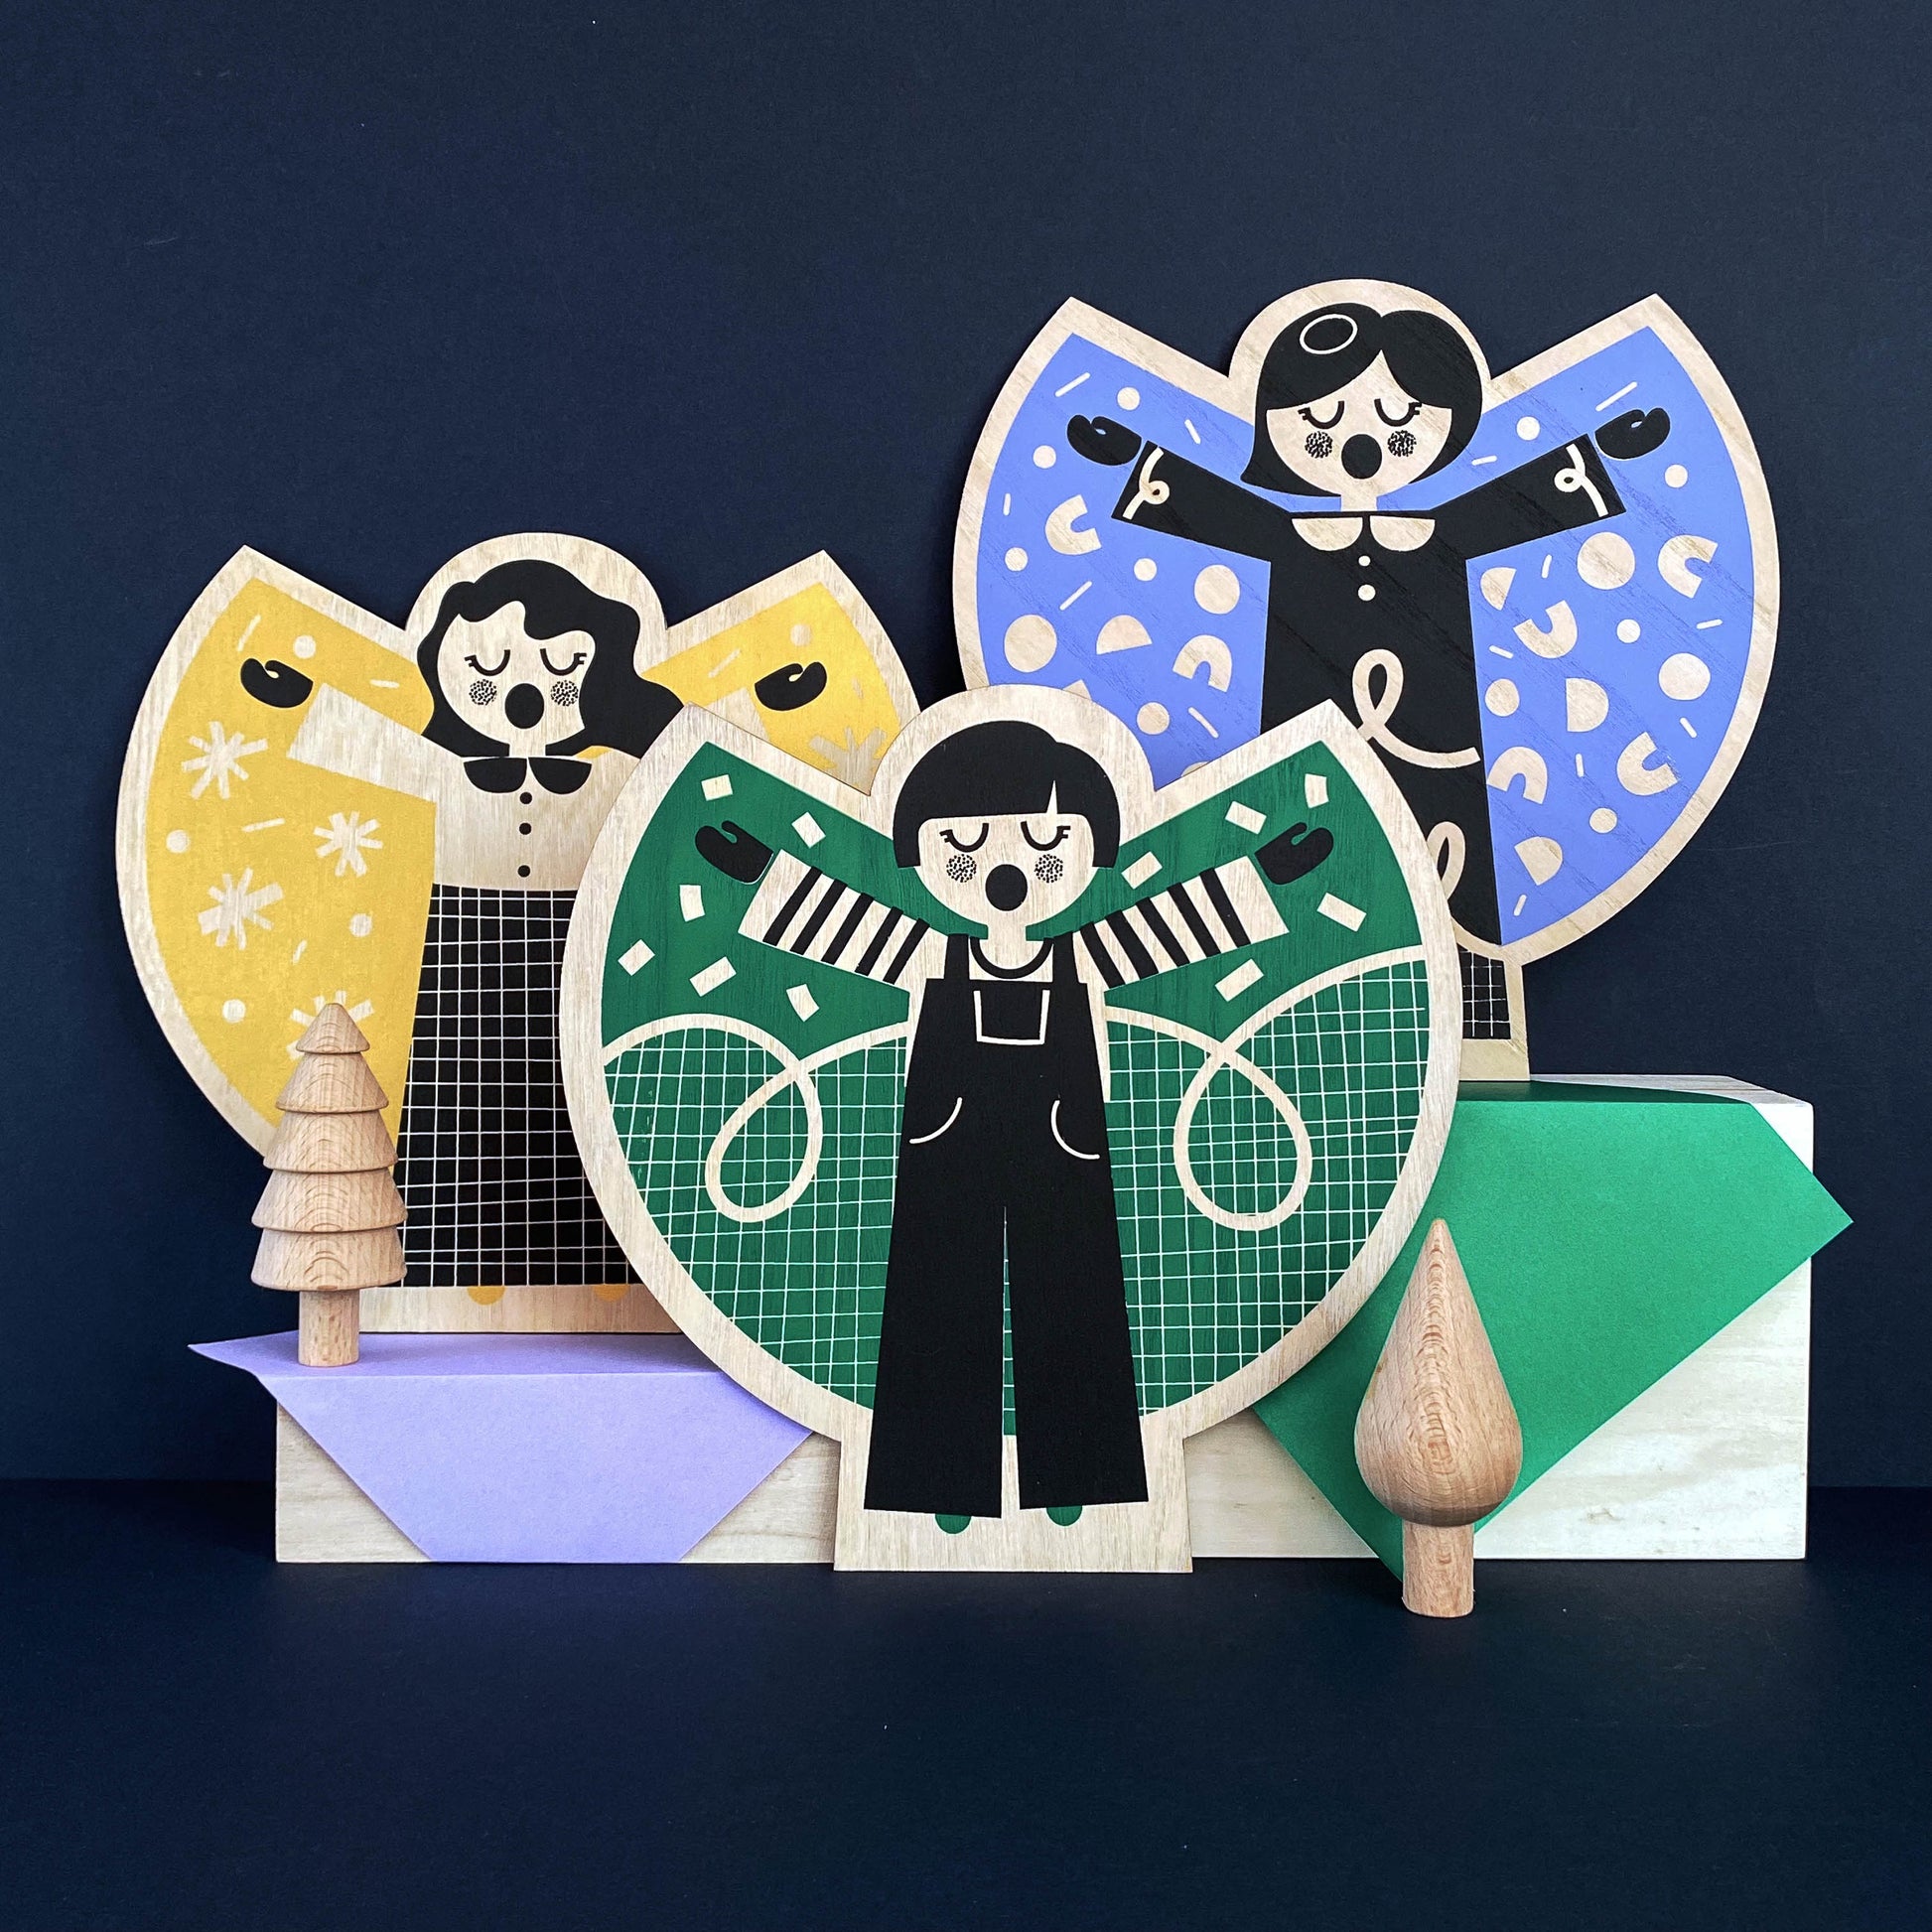 Screen Printed Angel by The Print Lass - Gold, green and lilac Angels shown on wooden blocks with a navy background